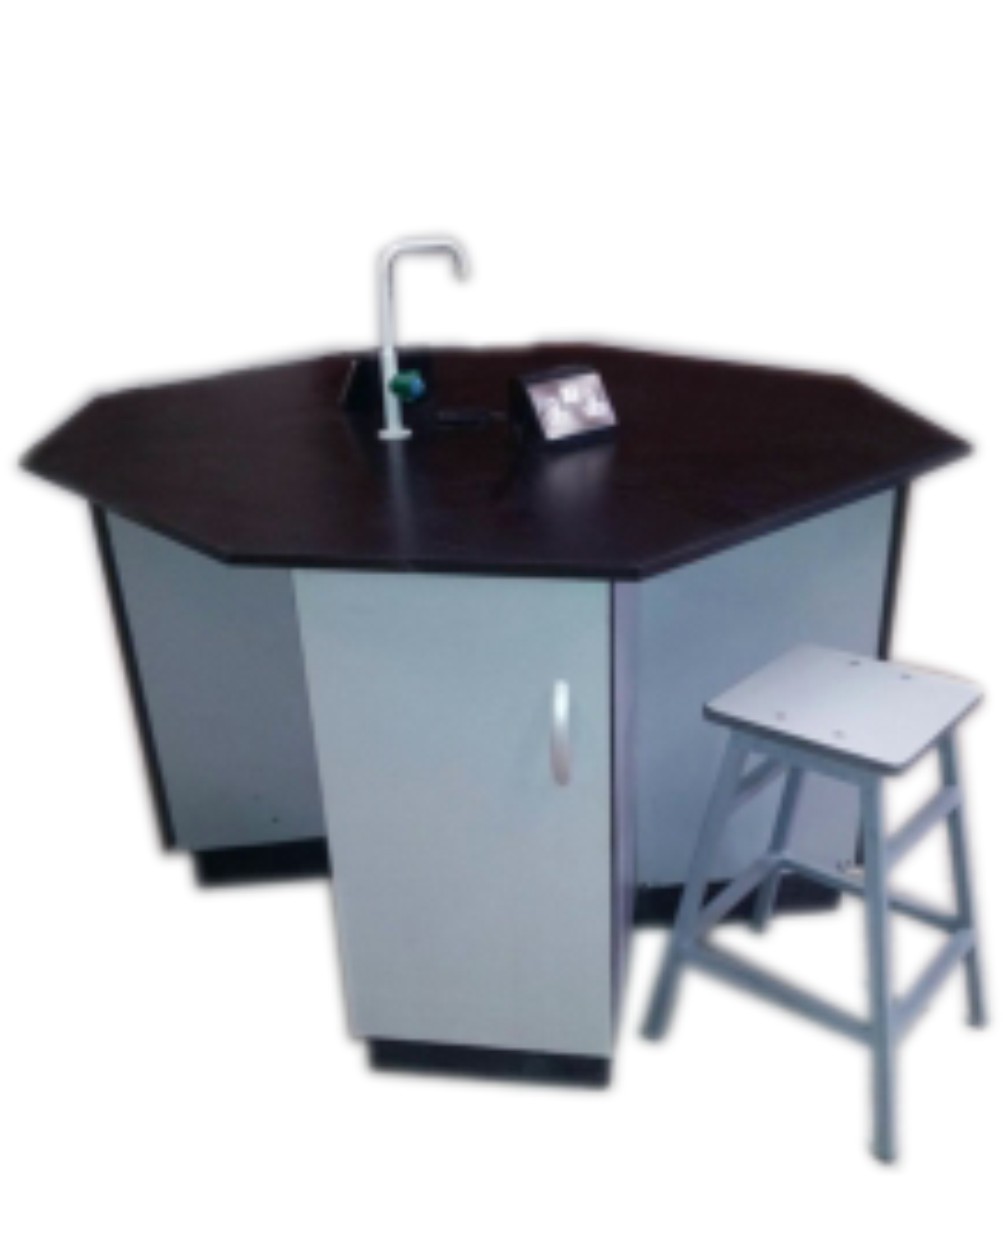 laboratory-worktop-with-sink-cabinets-and-stool